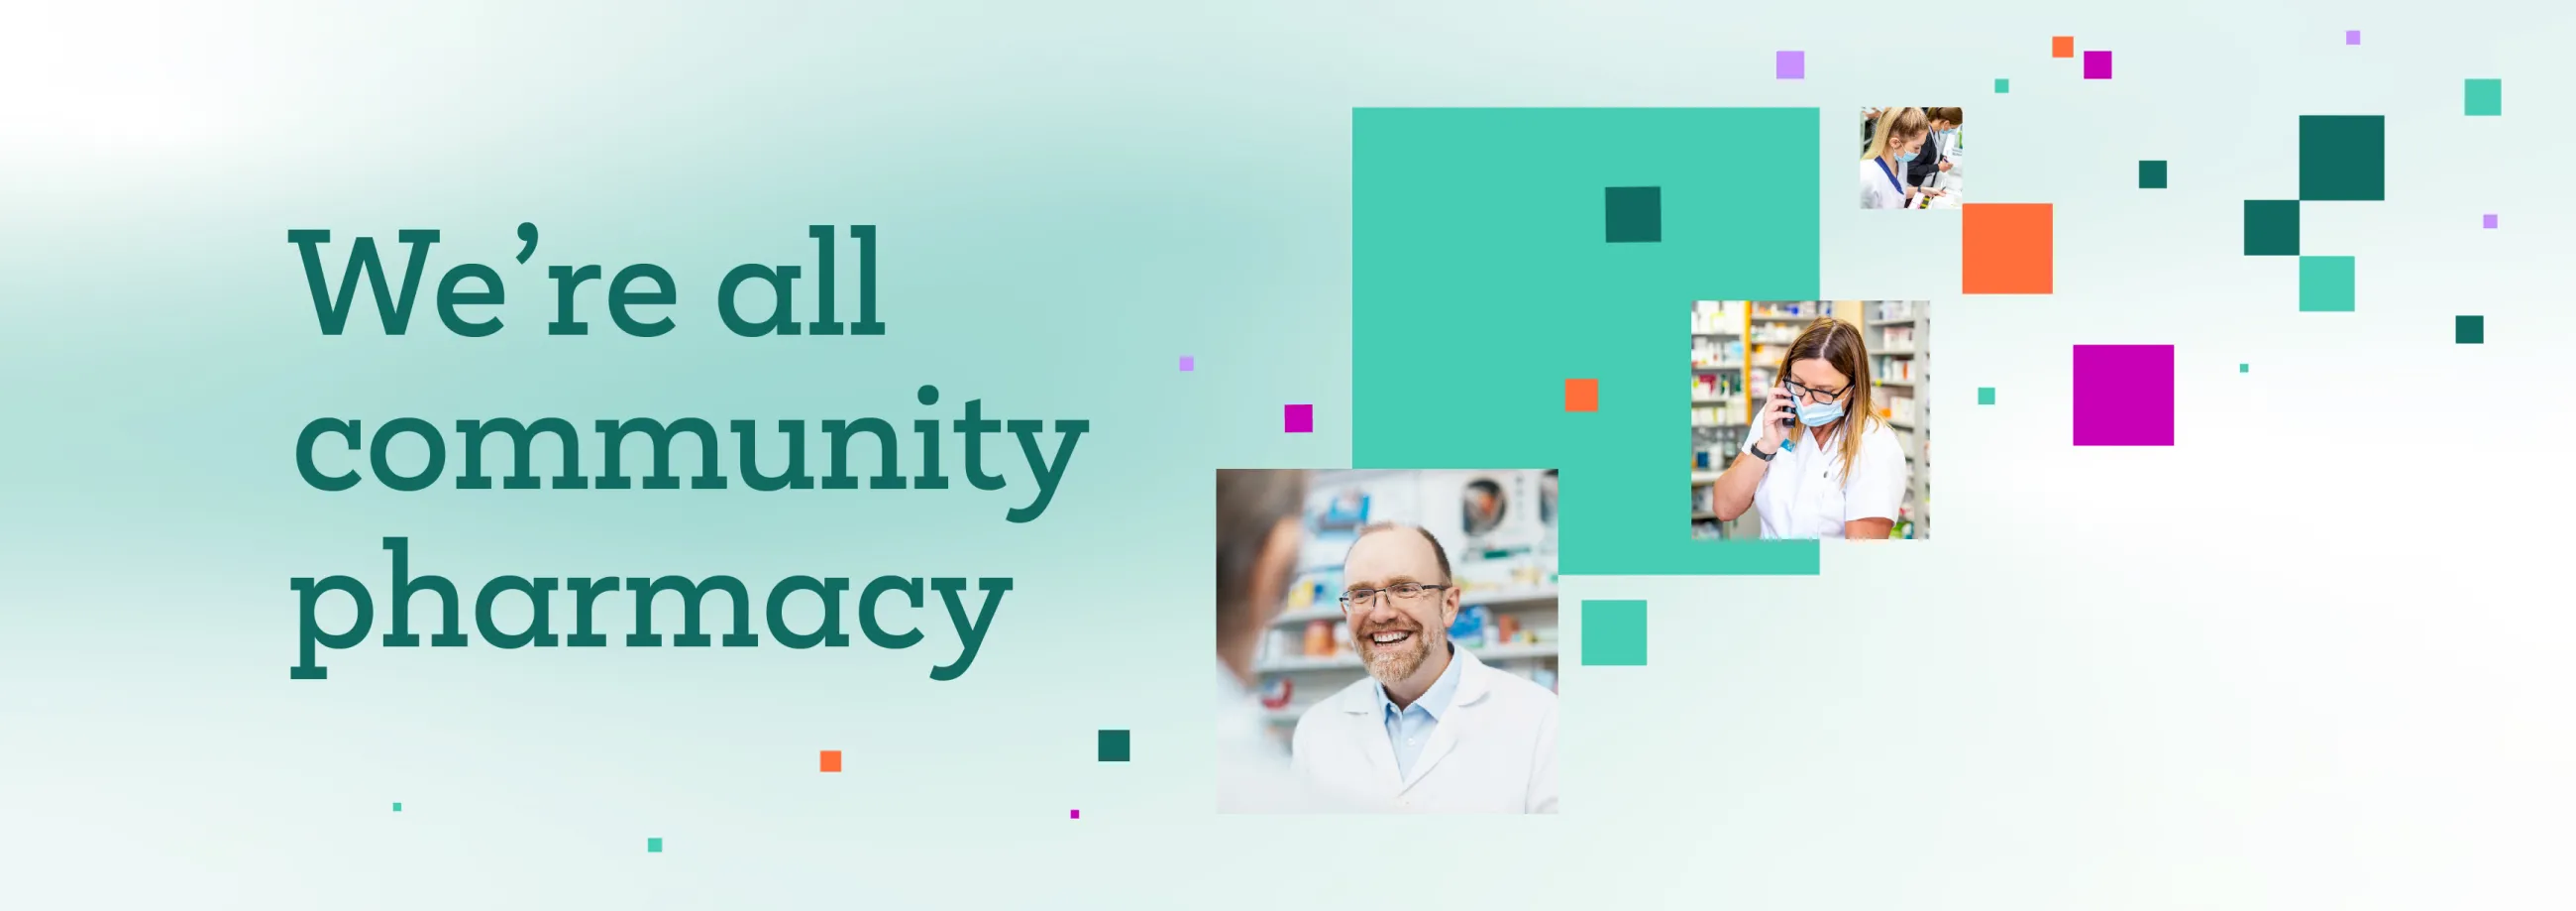 Community Pharmacy England brand assets and photography